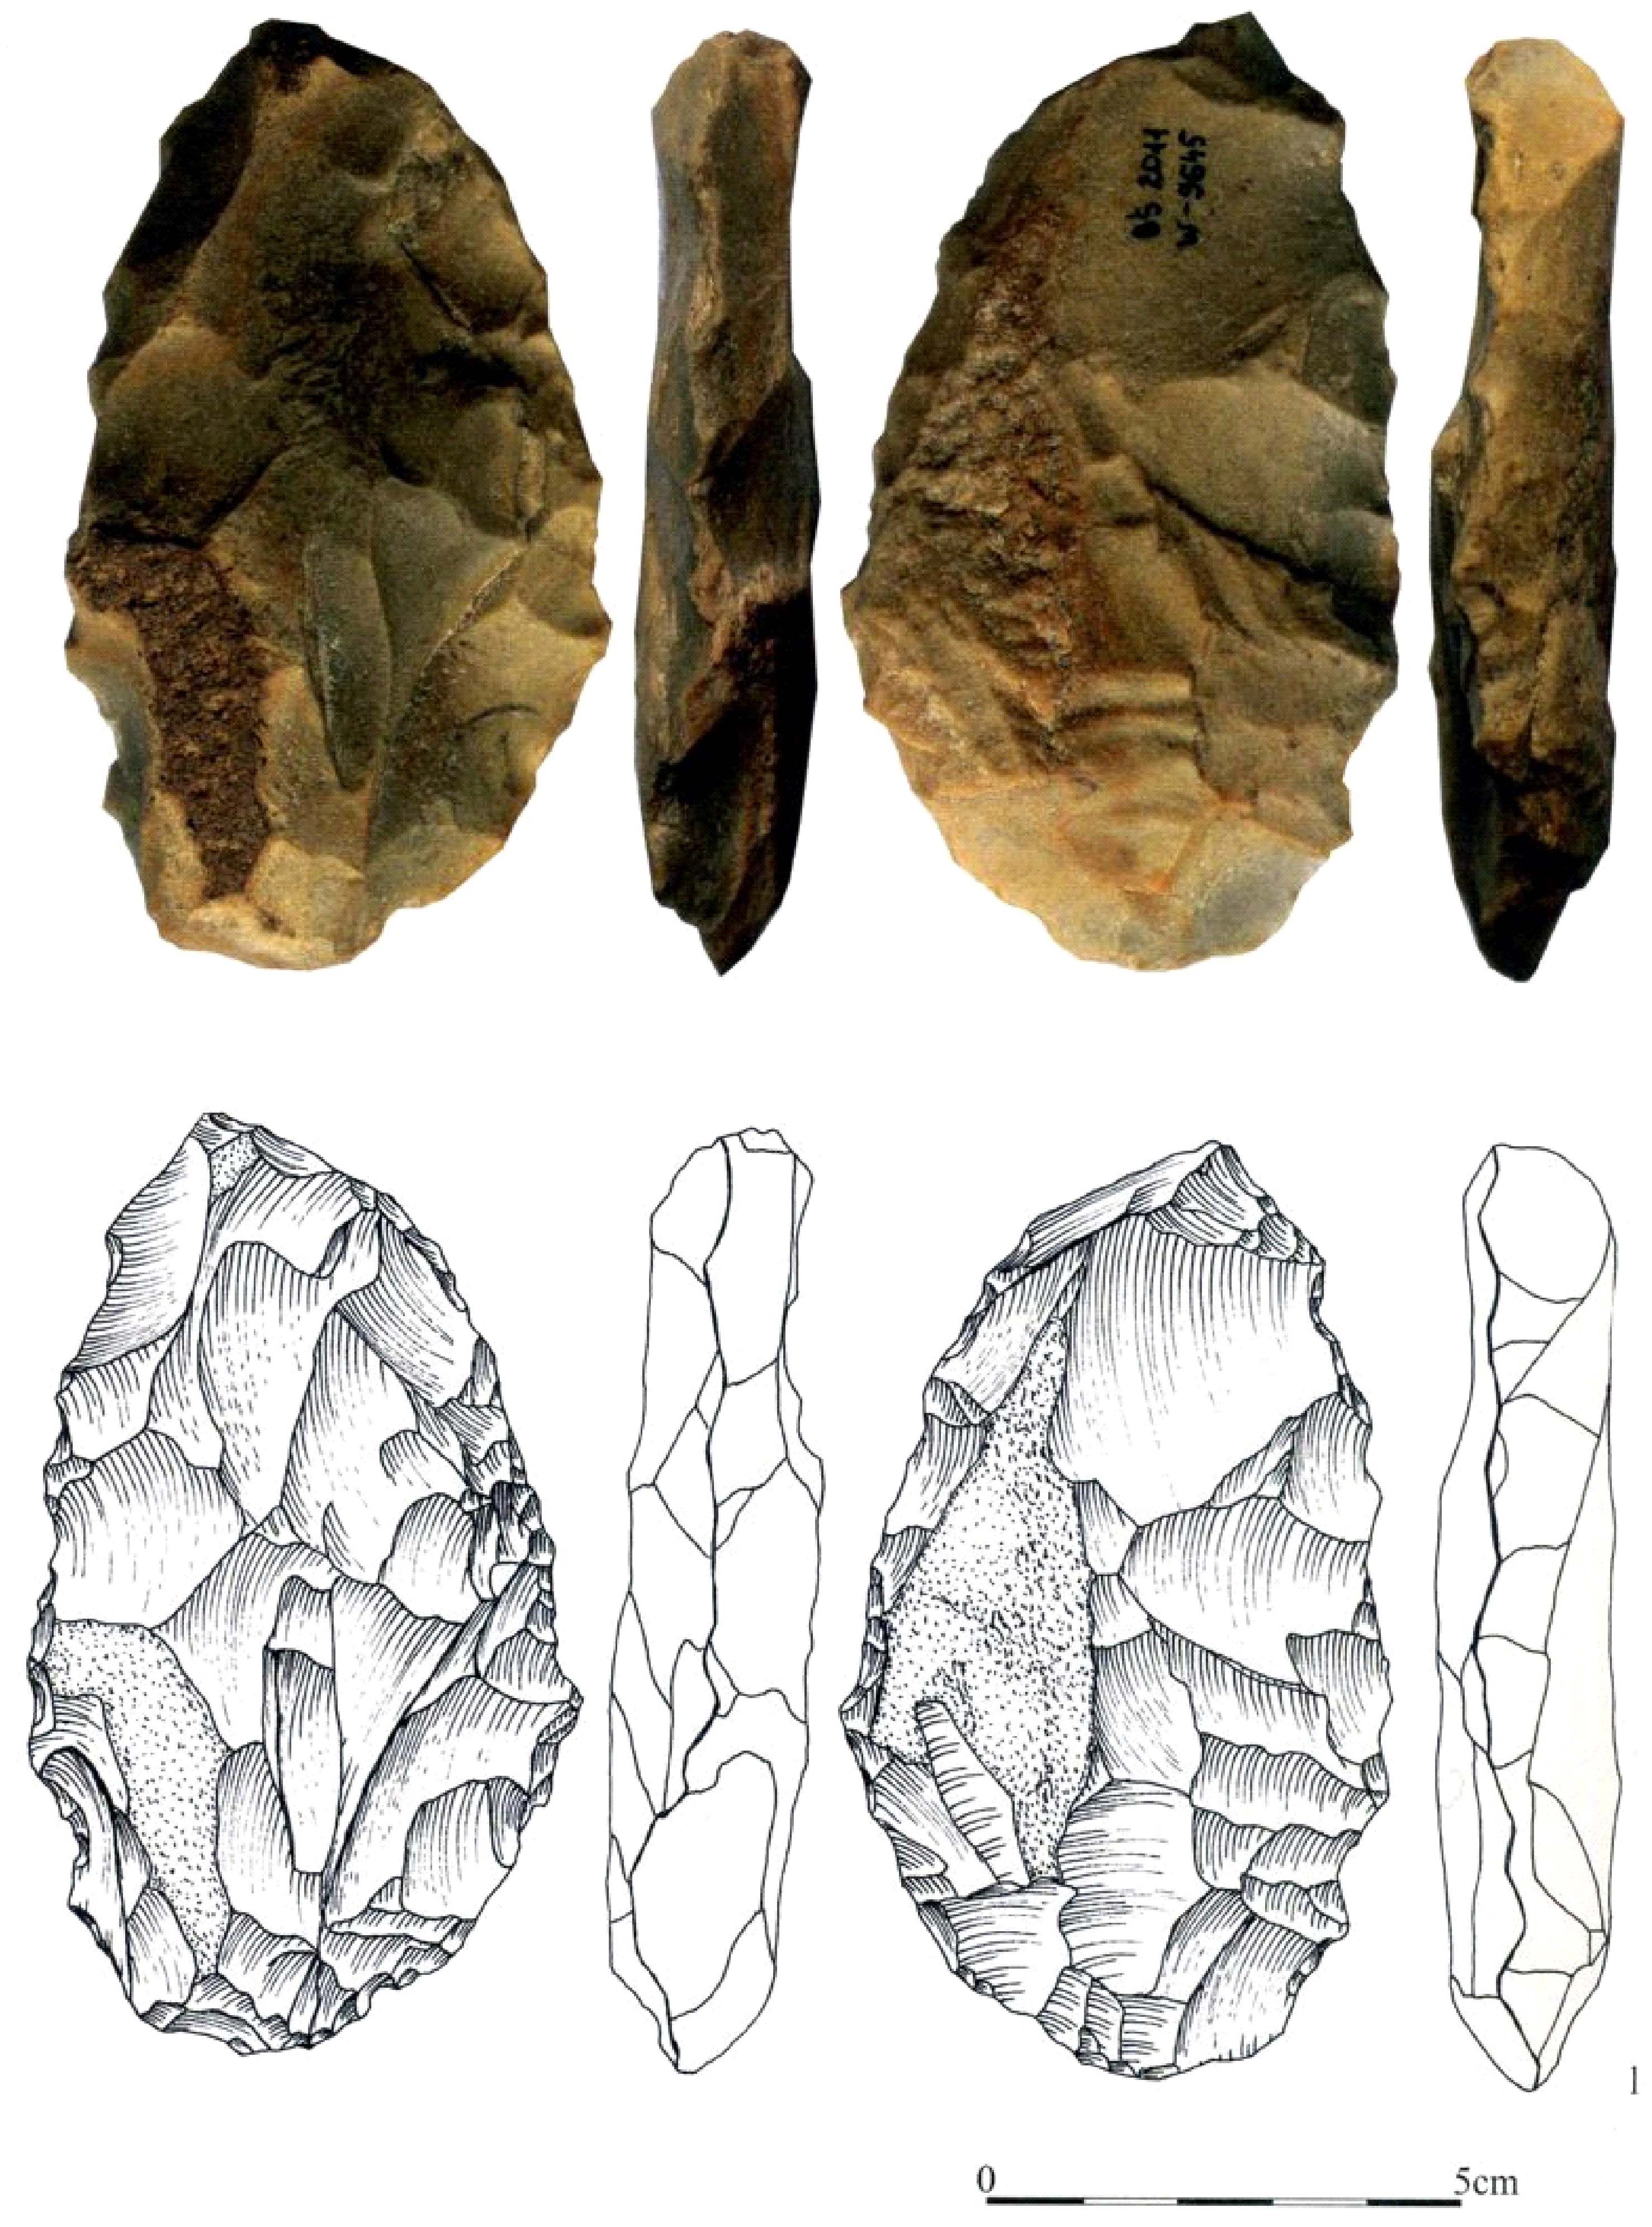 middle paleolithic tools